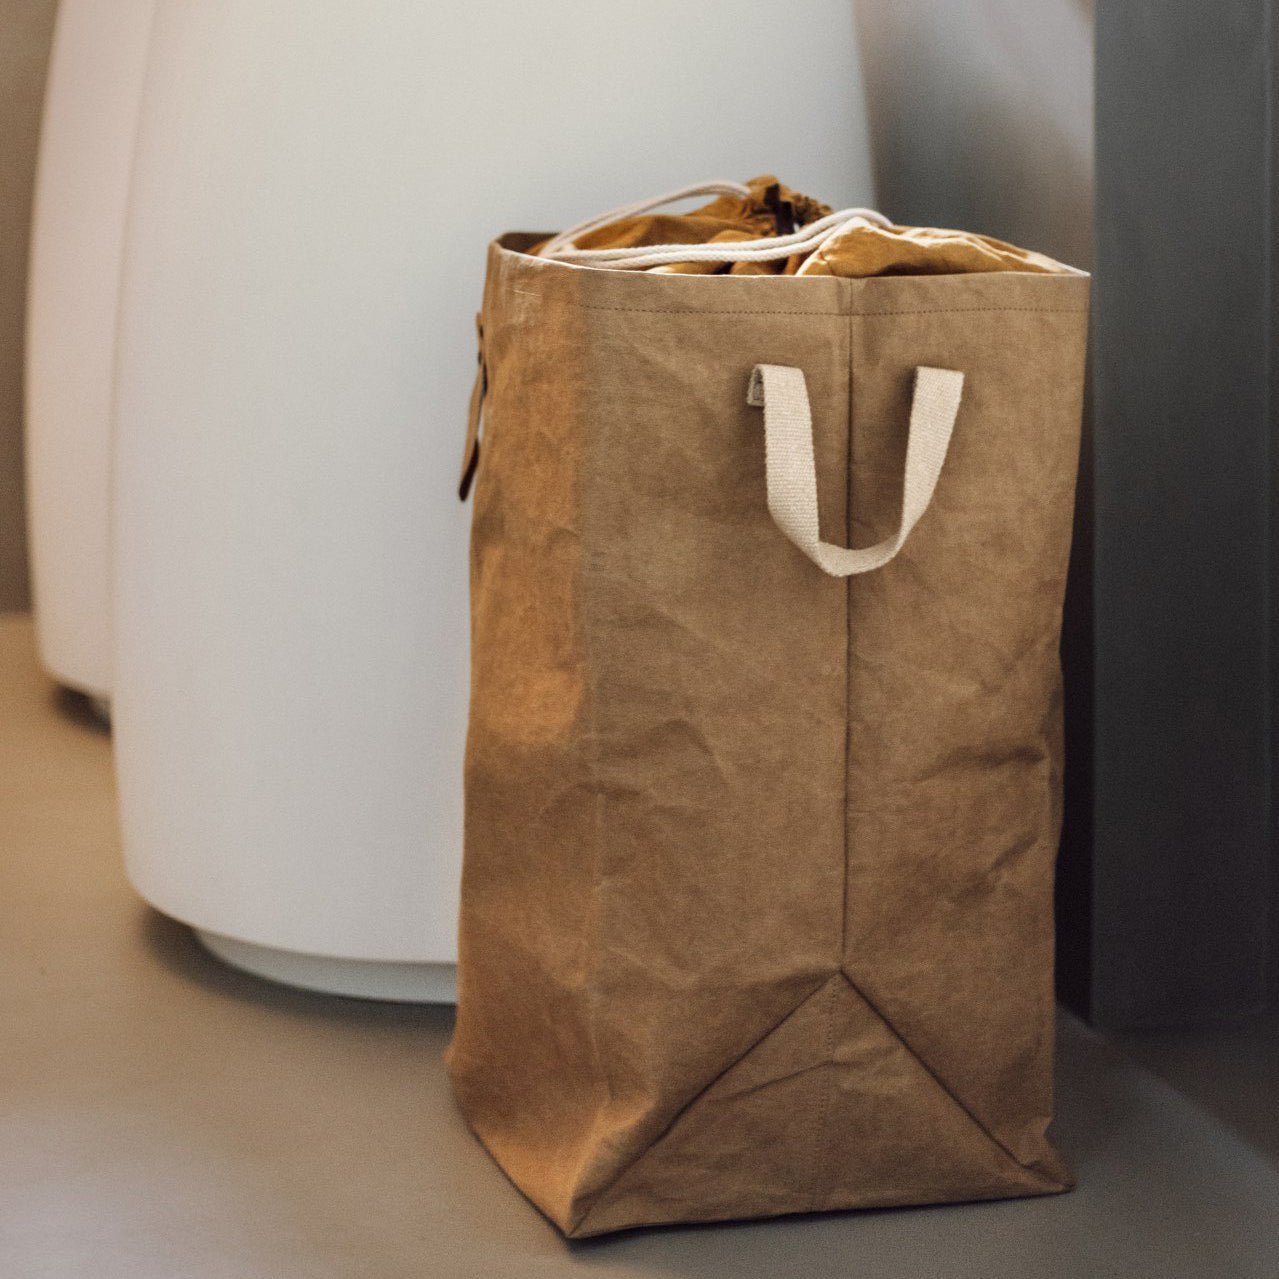 A washable paper laundry bag is shown in tan in a home setting, from a side angle.